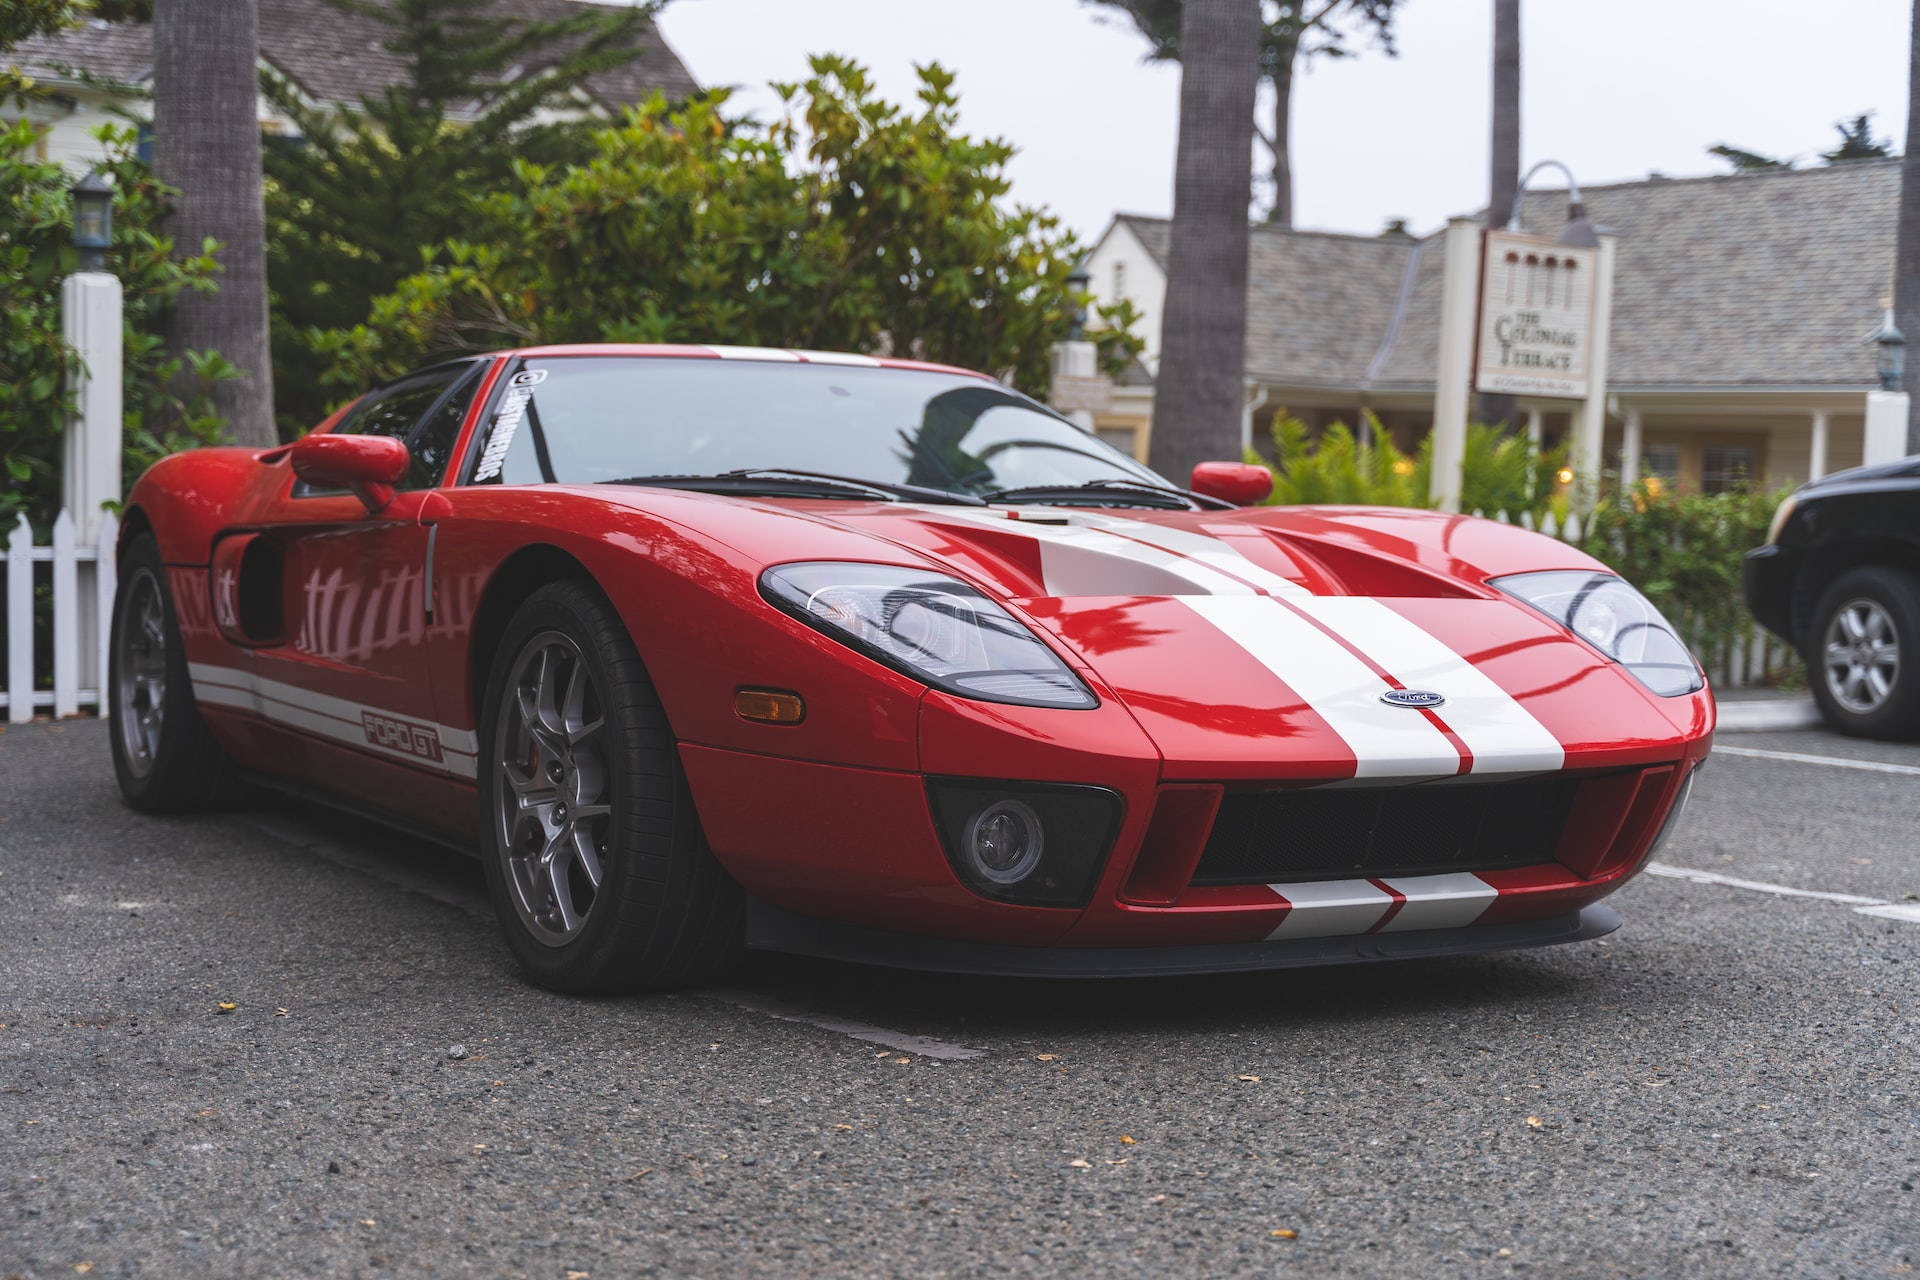 Scarlet-colored Ford Gt Wallpaper